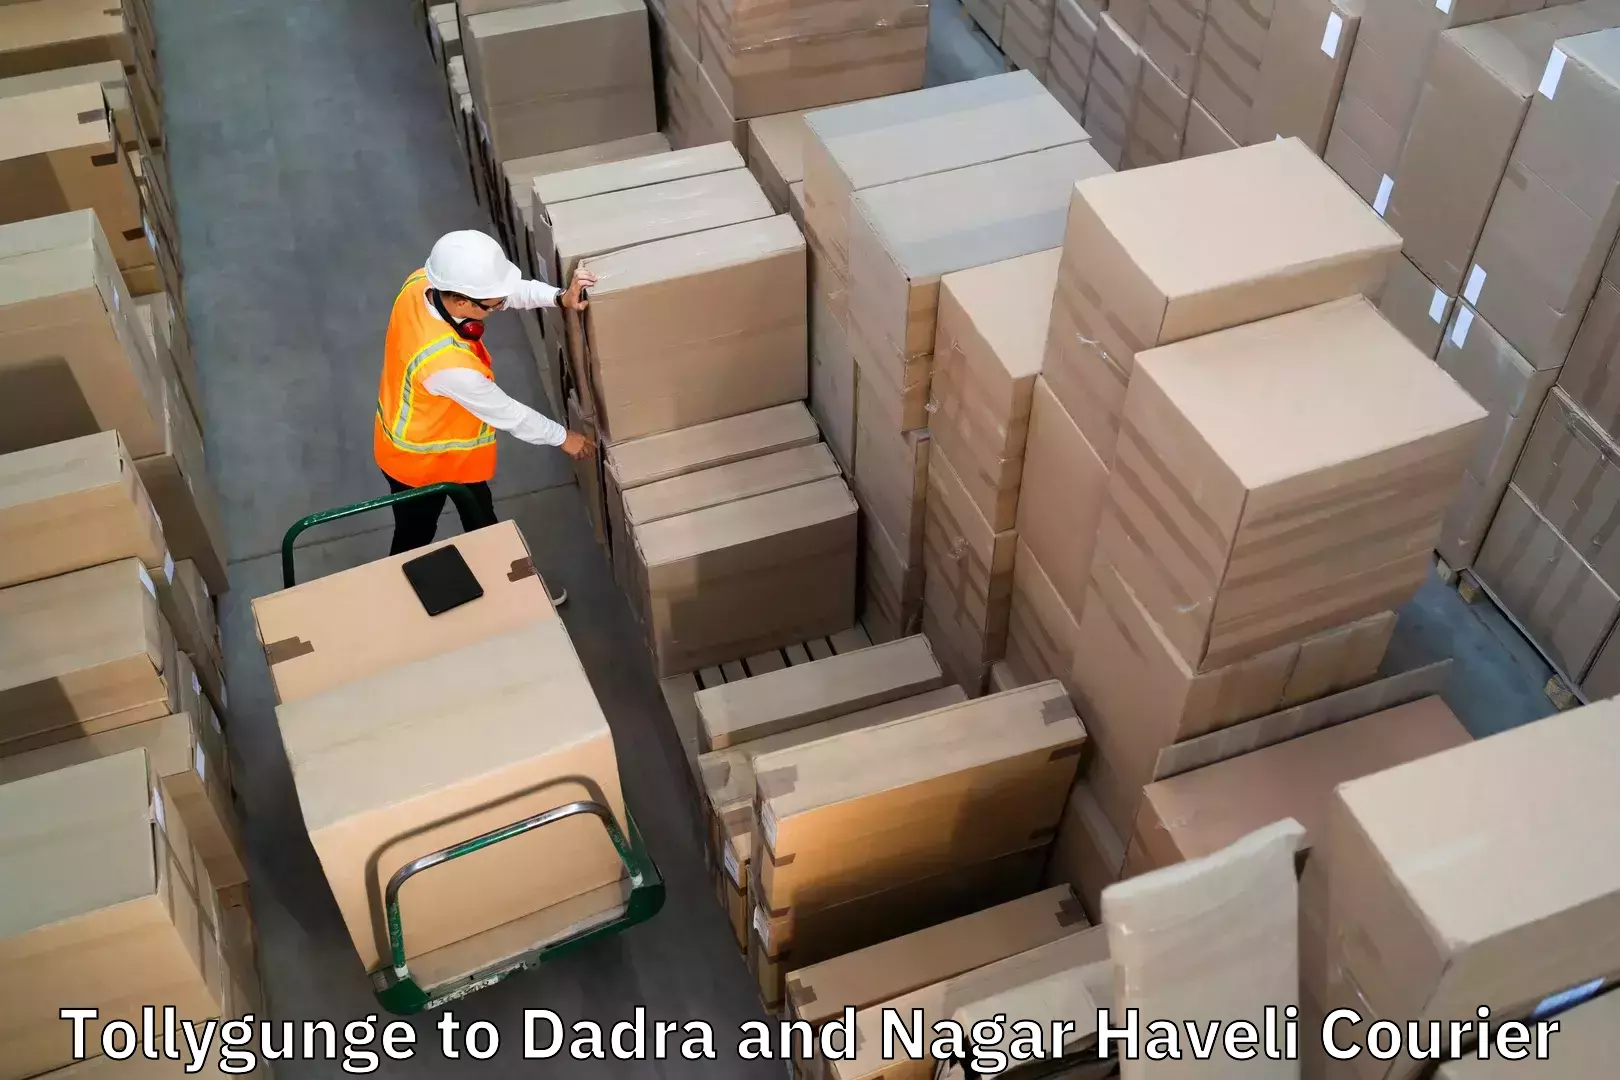 Luggage shipment specialists Tollygunge to Dadra and Nagar Haveli